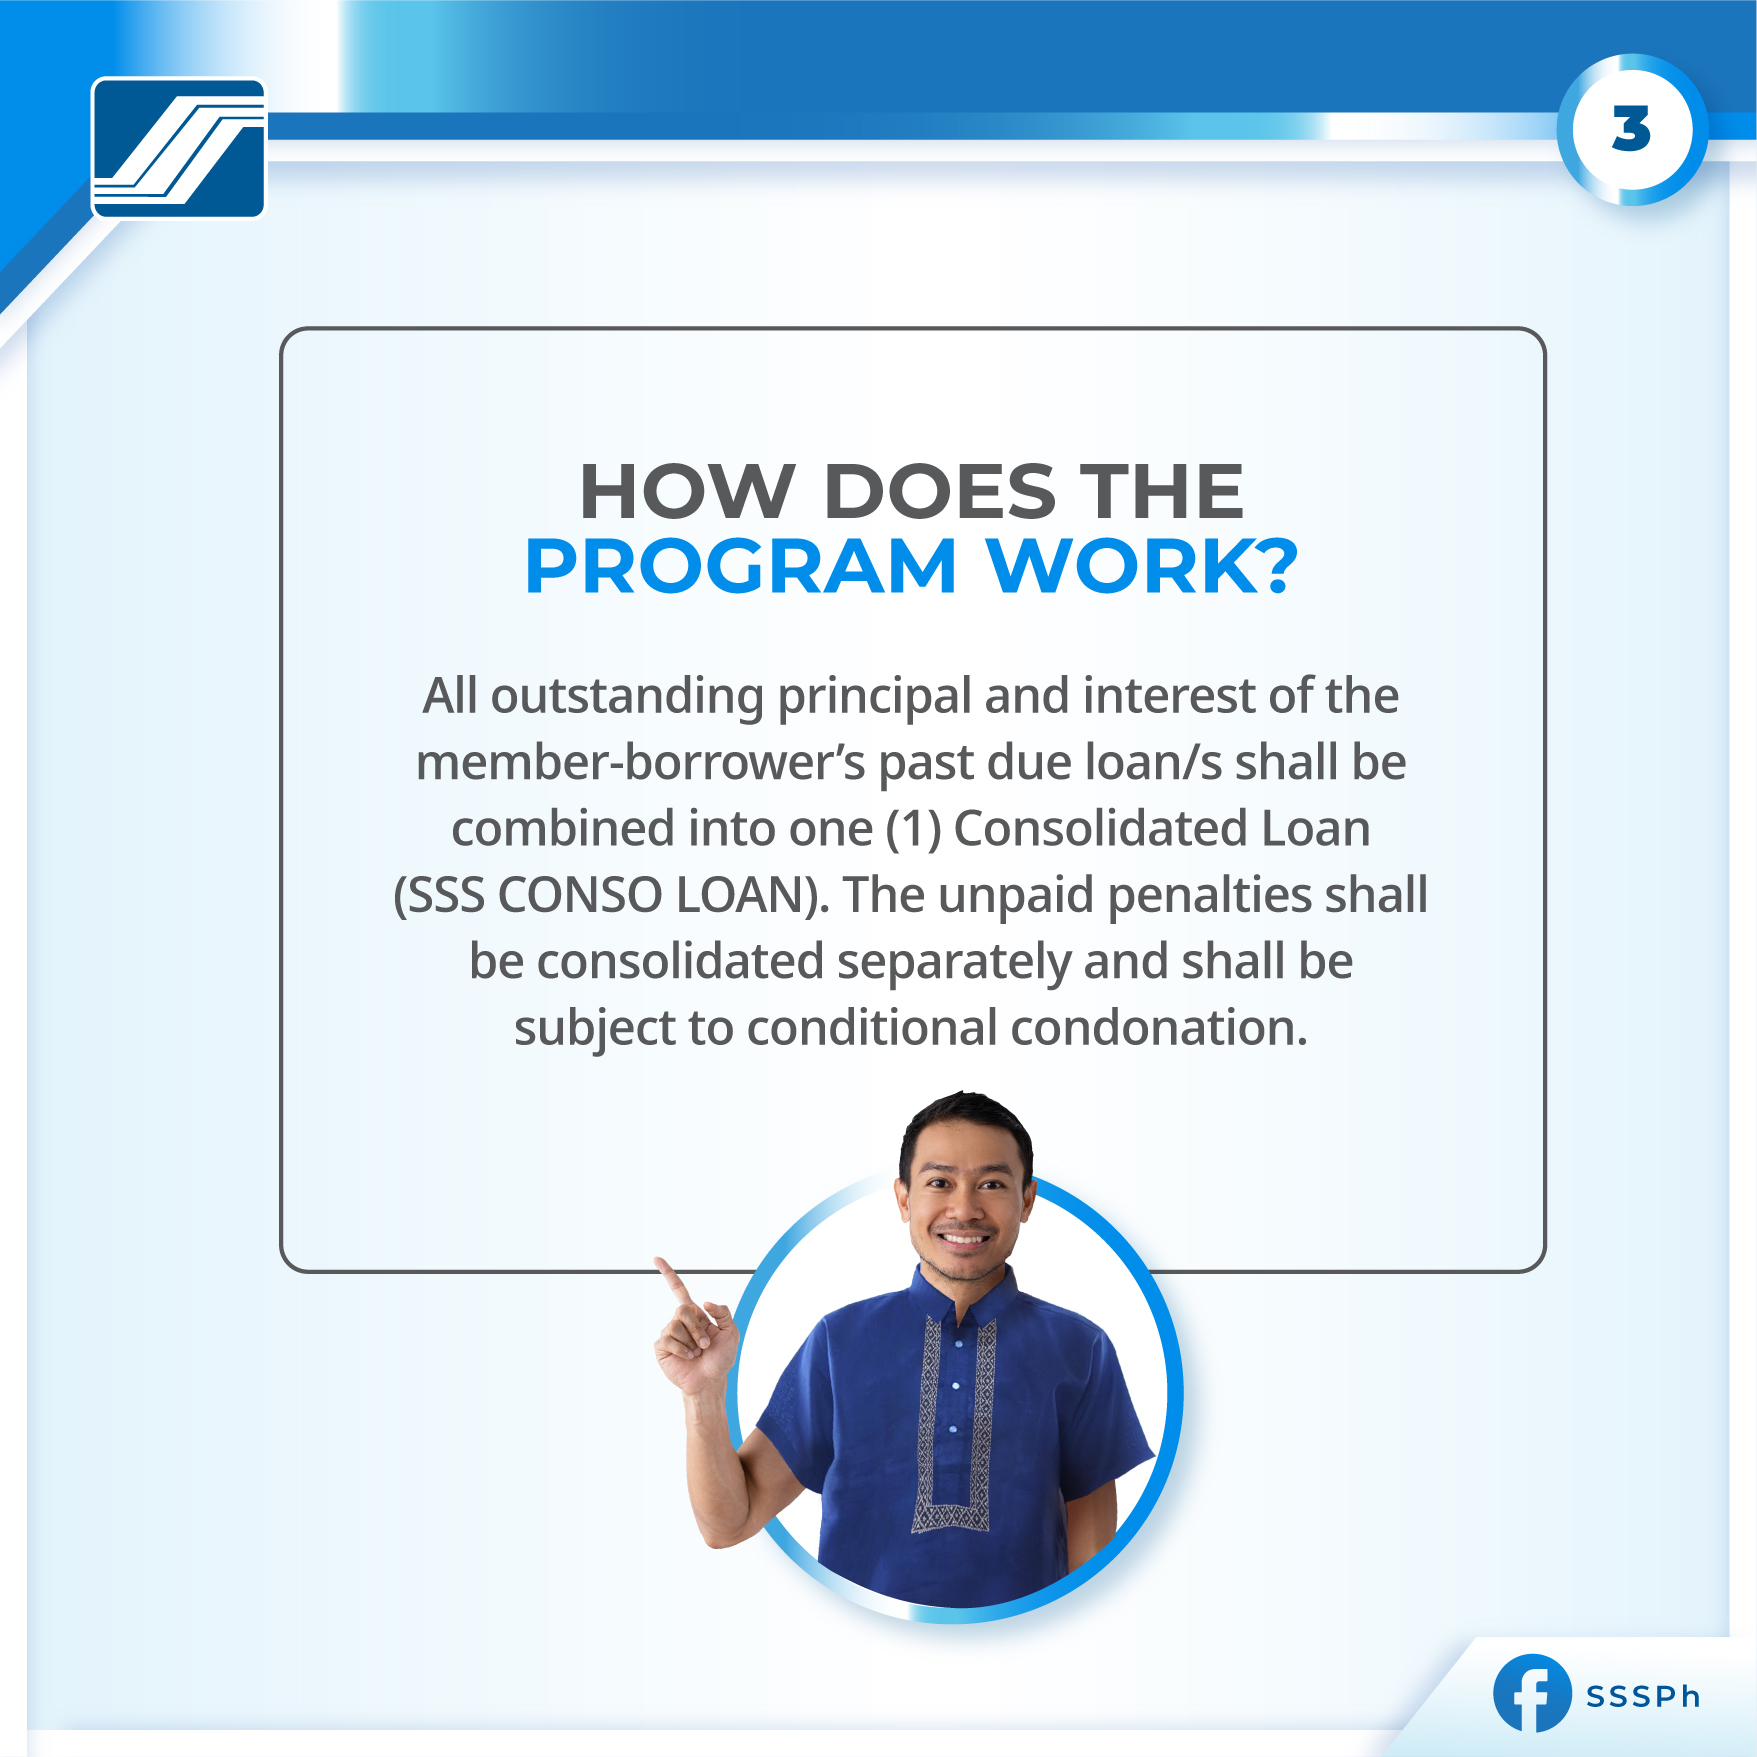 sss loan restructuring program - how loan penalty consolidation program works